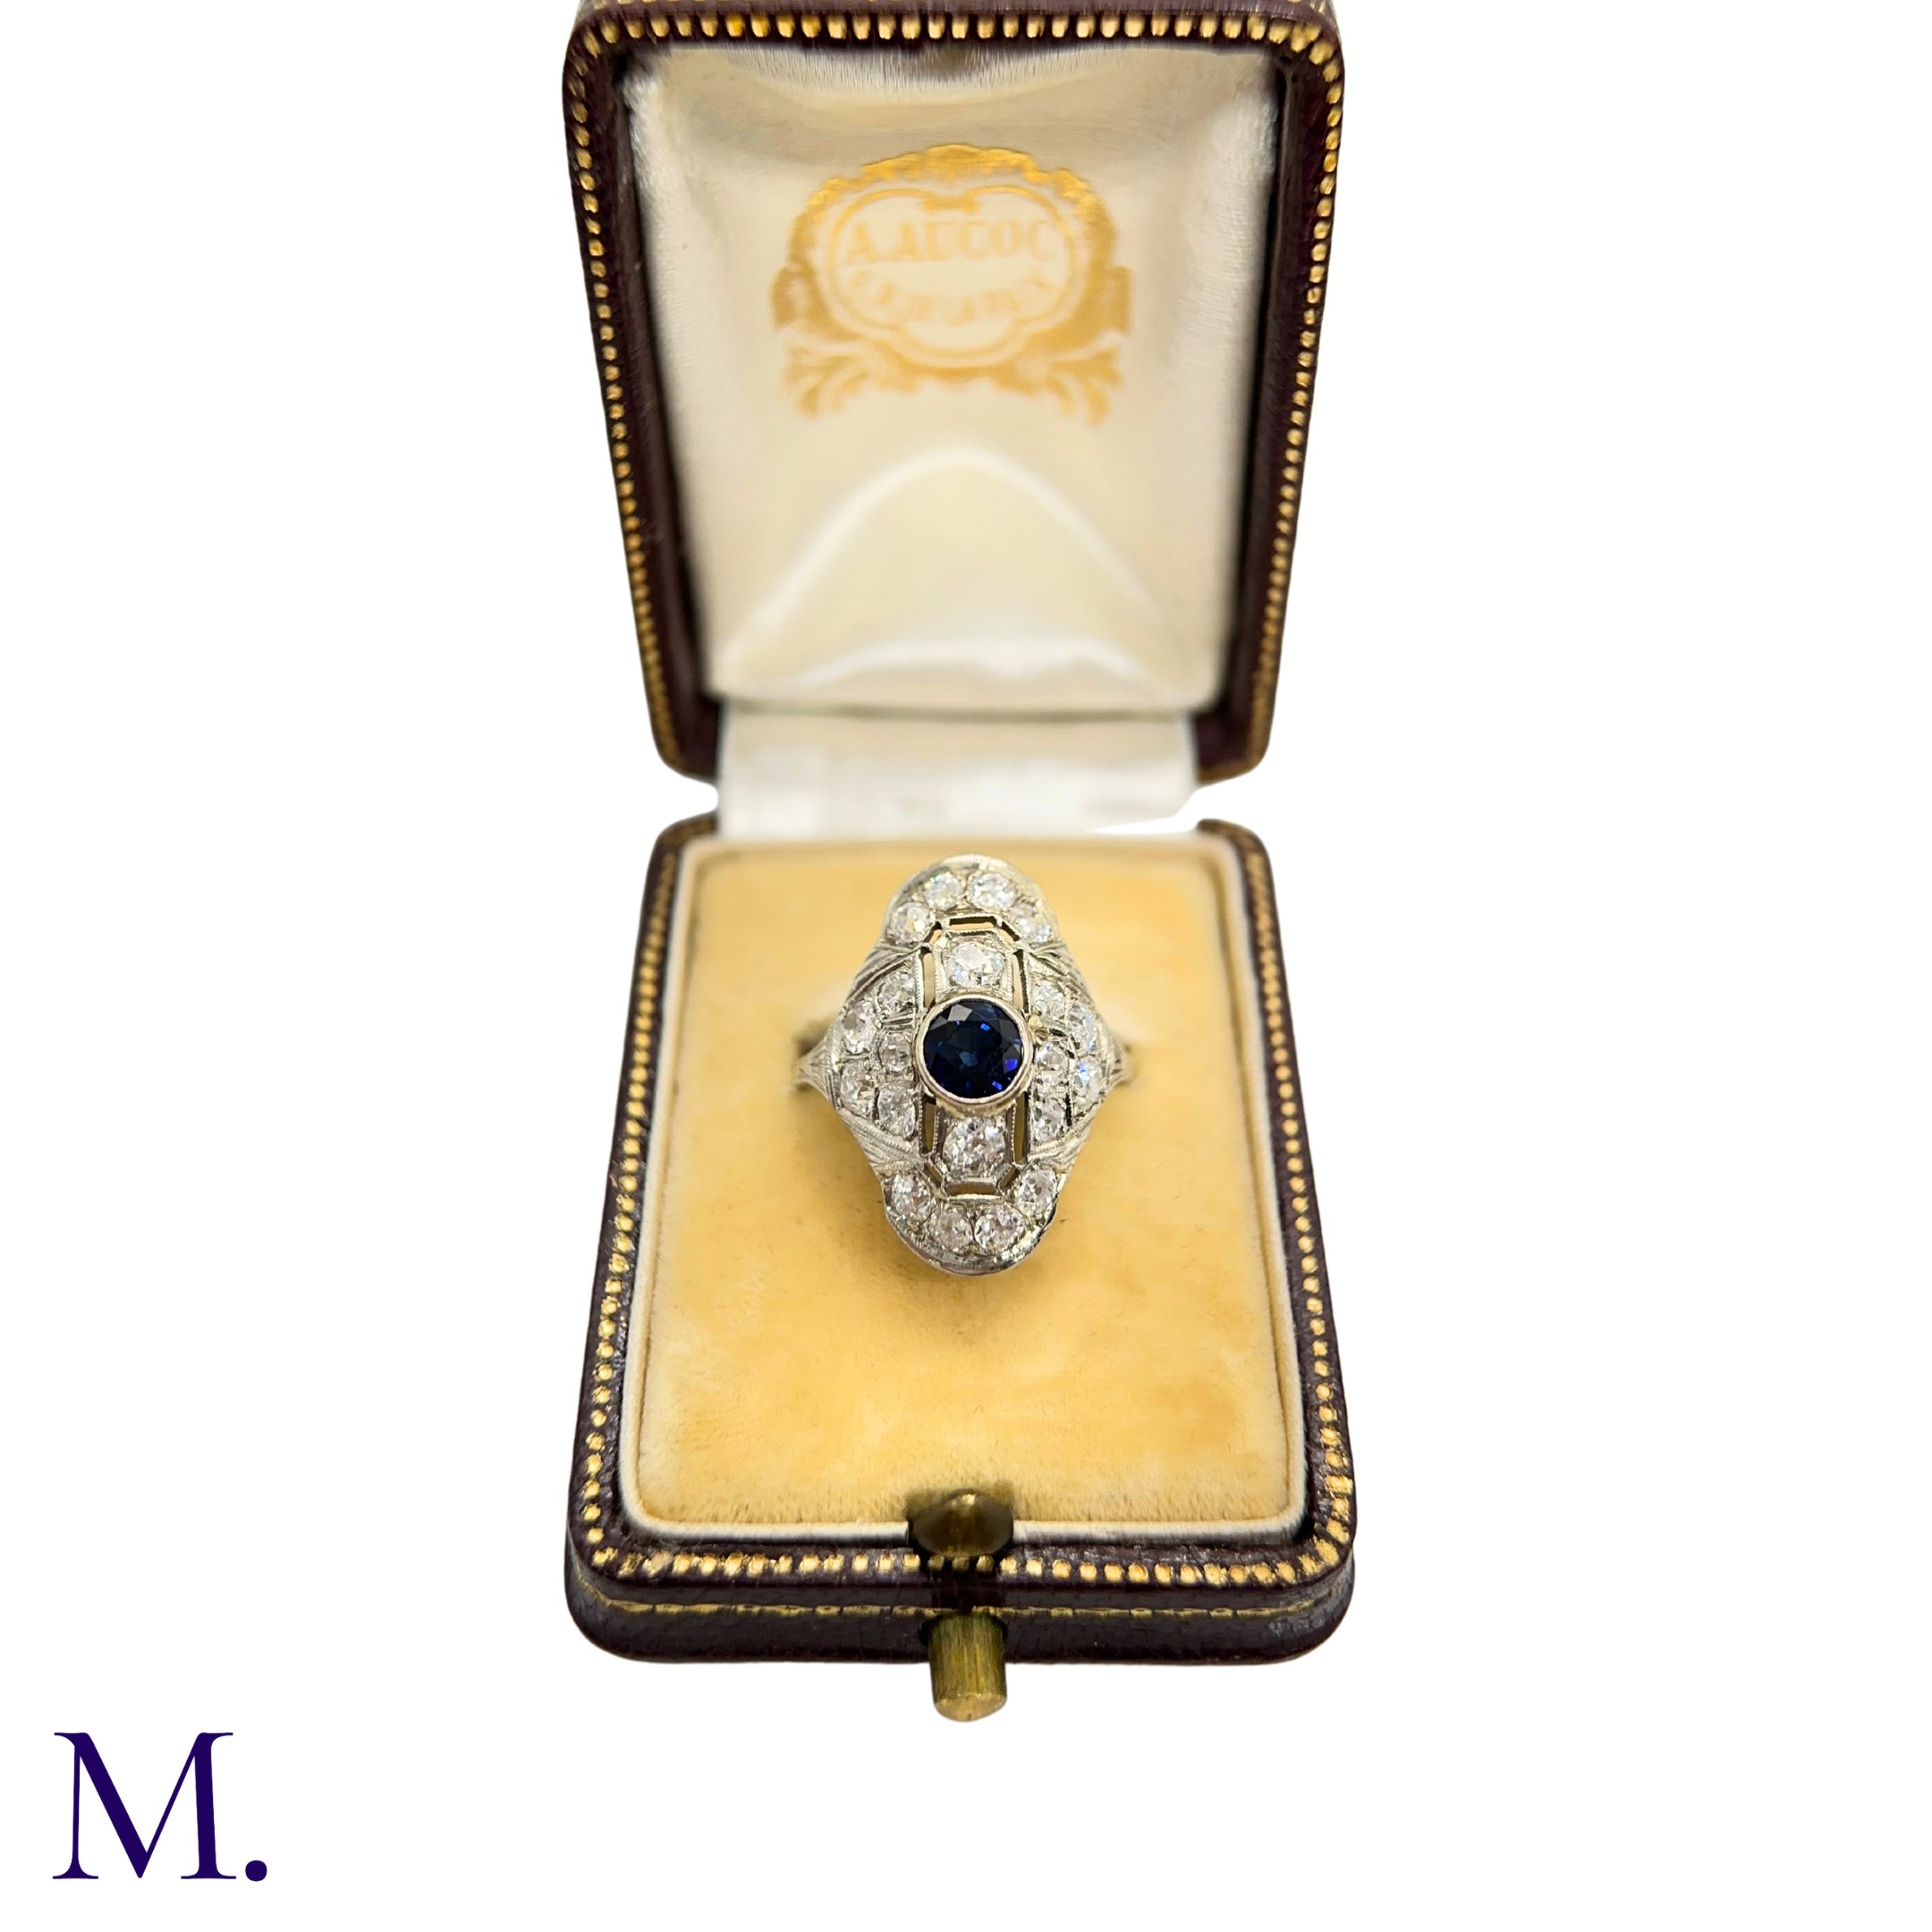 A Sapphire and Diamond Ring - Image 7 of 7